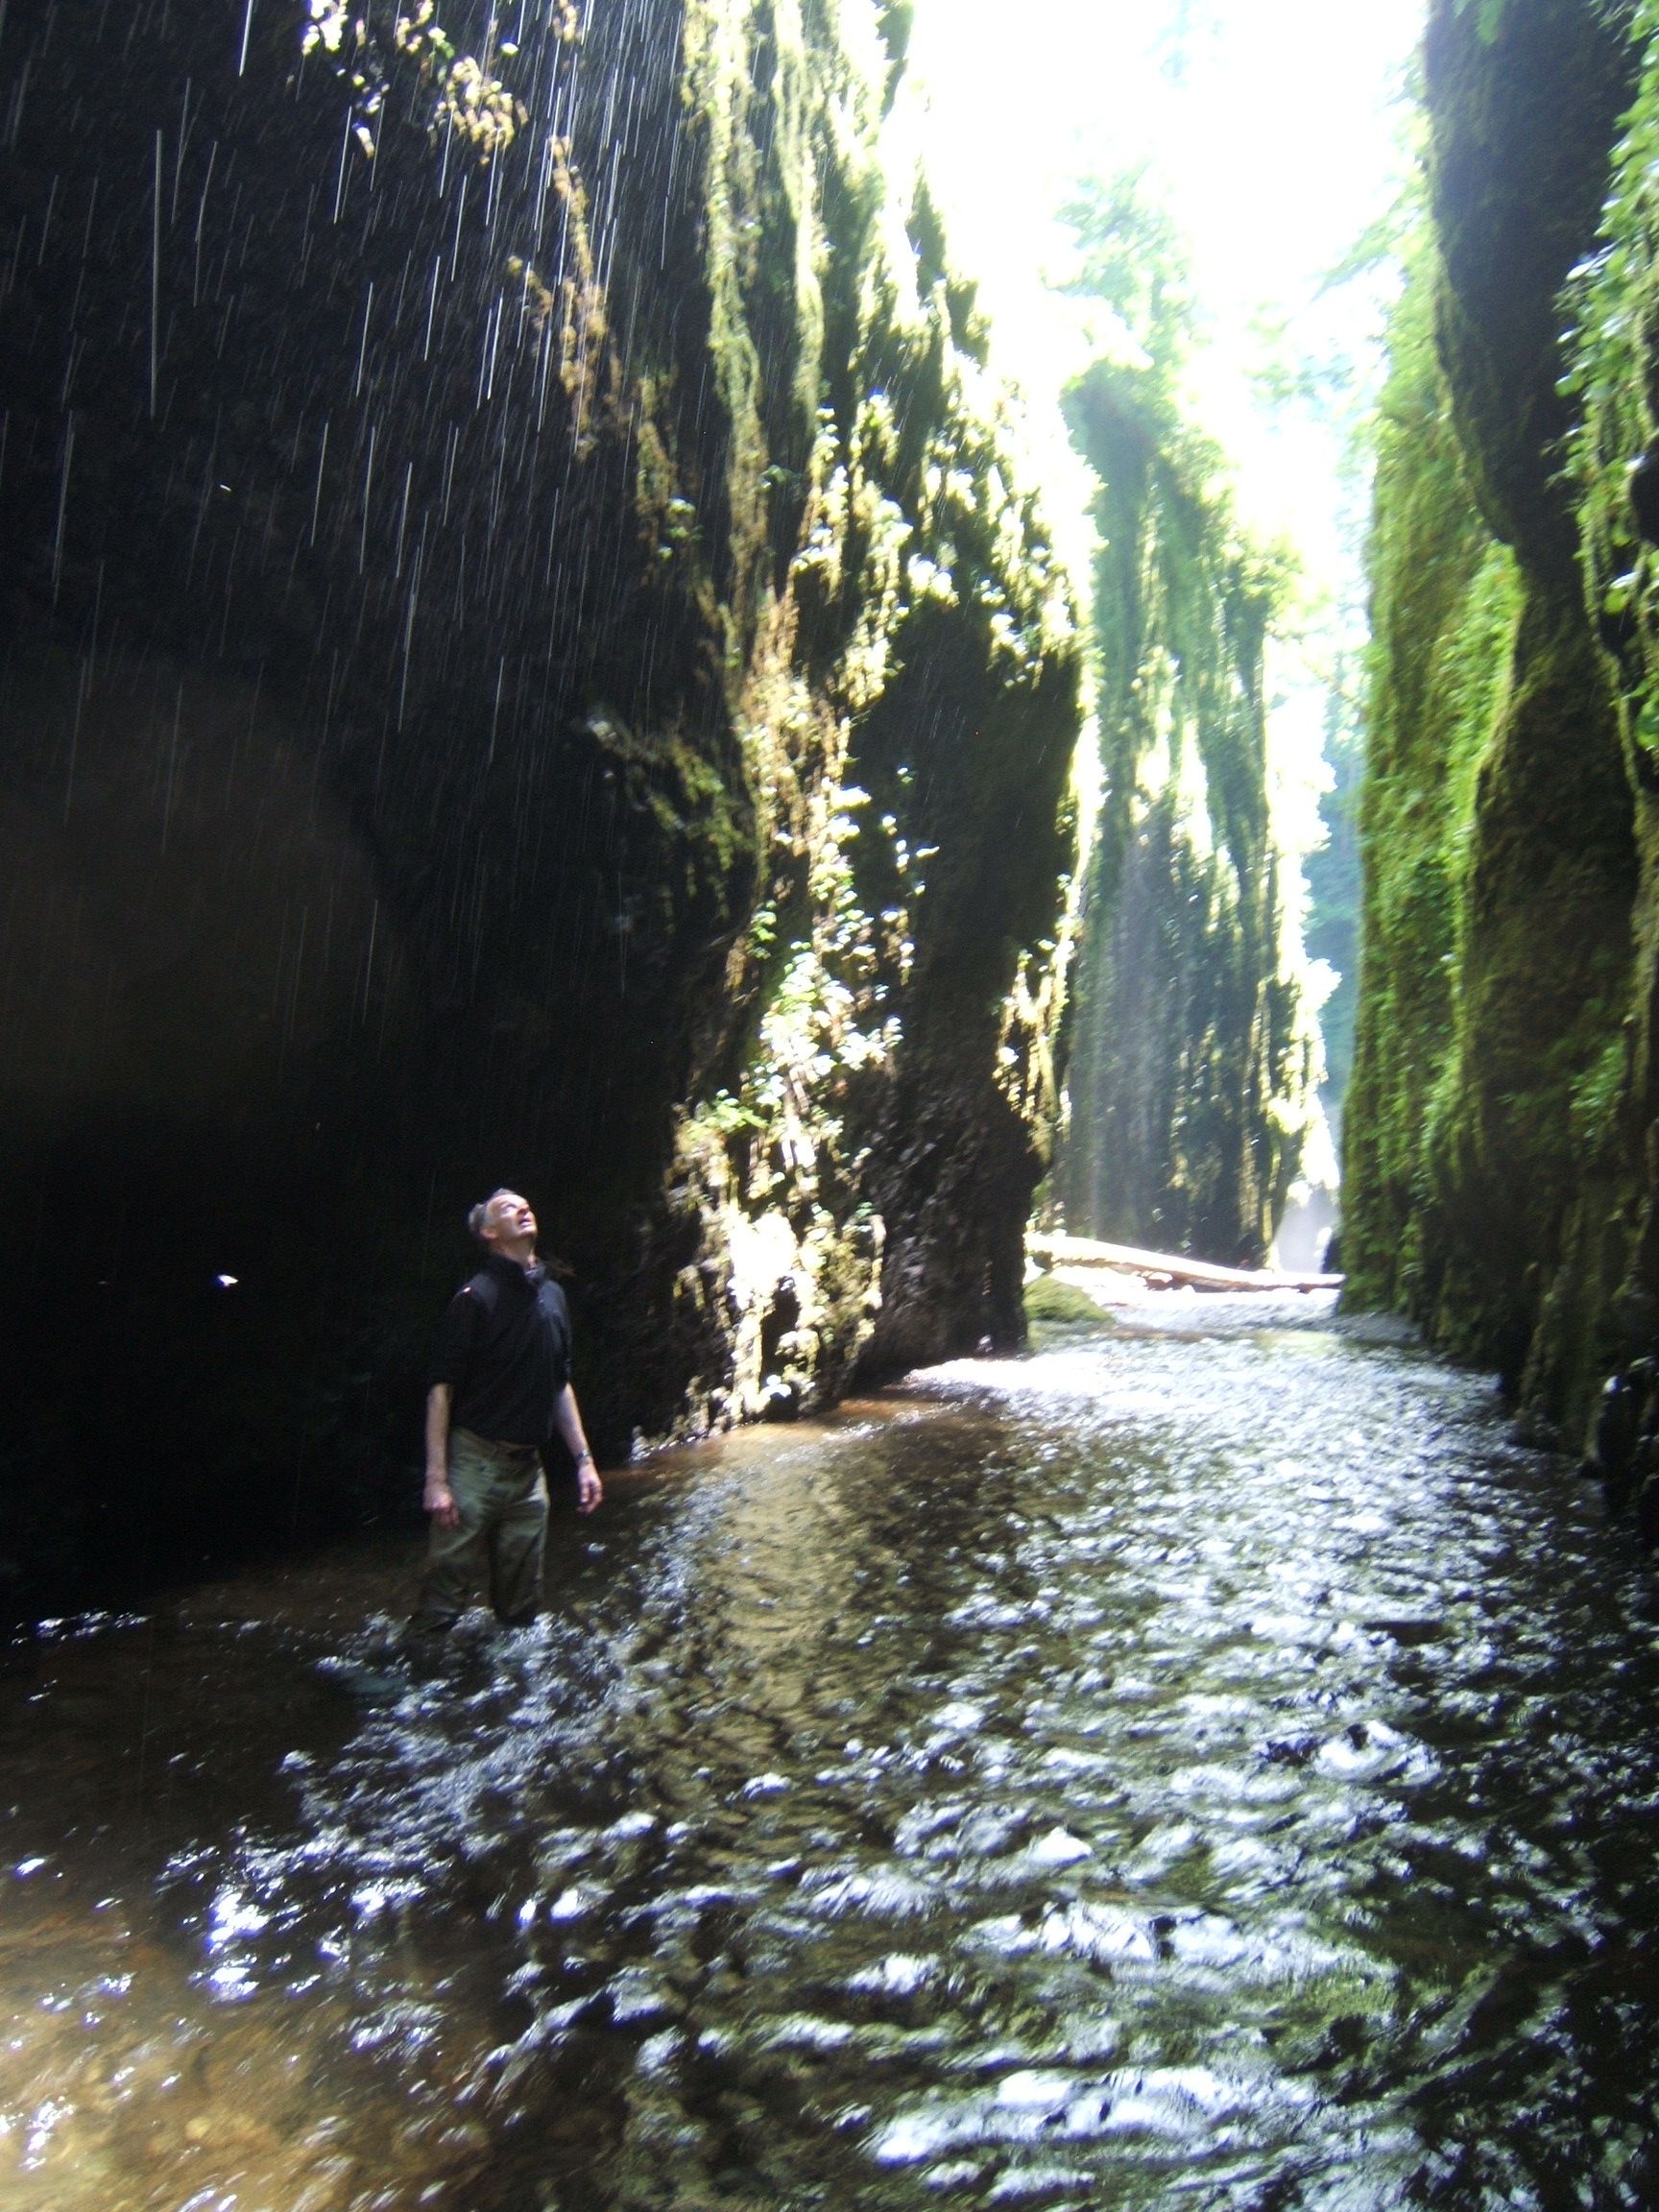 into the Oneonta Gorge